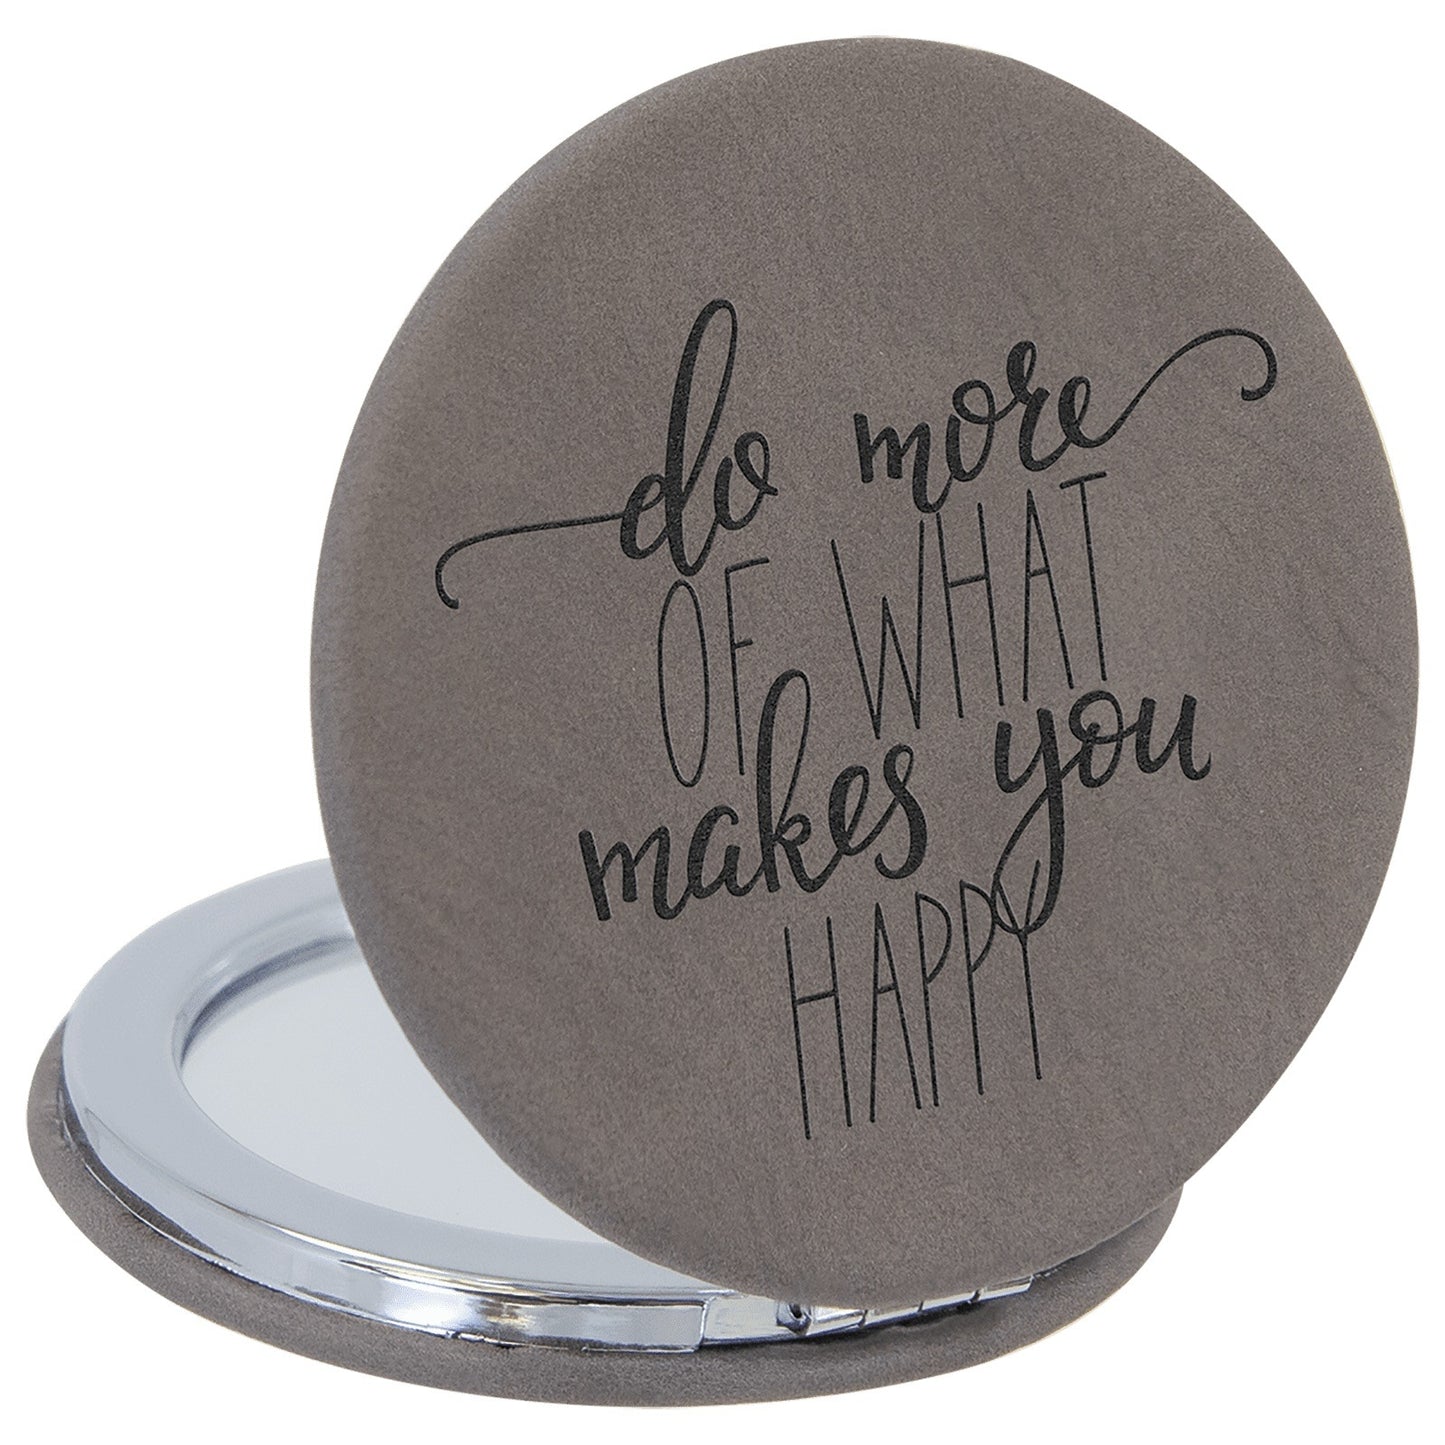 Personalized Compact Mirror, Pocket Mirror, Bridesmaid Gift, Bachelorette Party Favors, Make Up Mirror